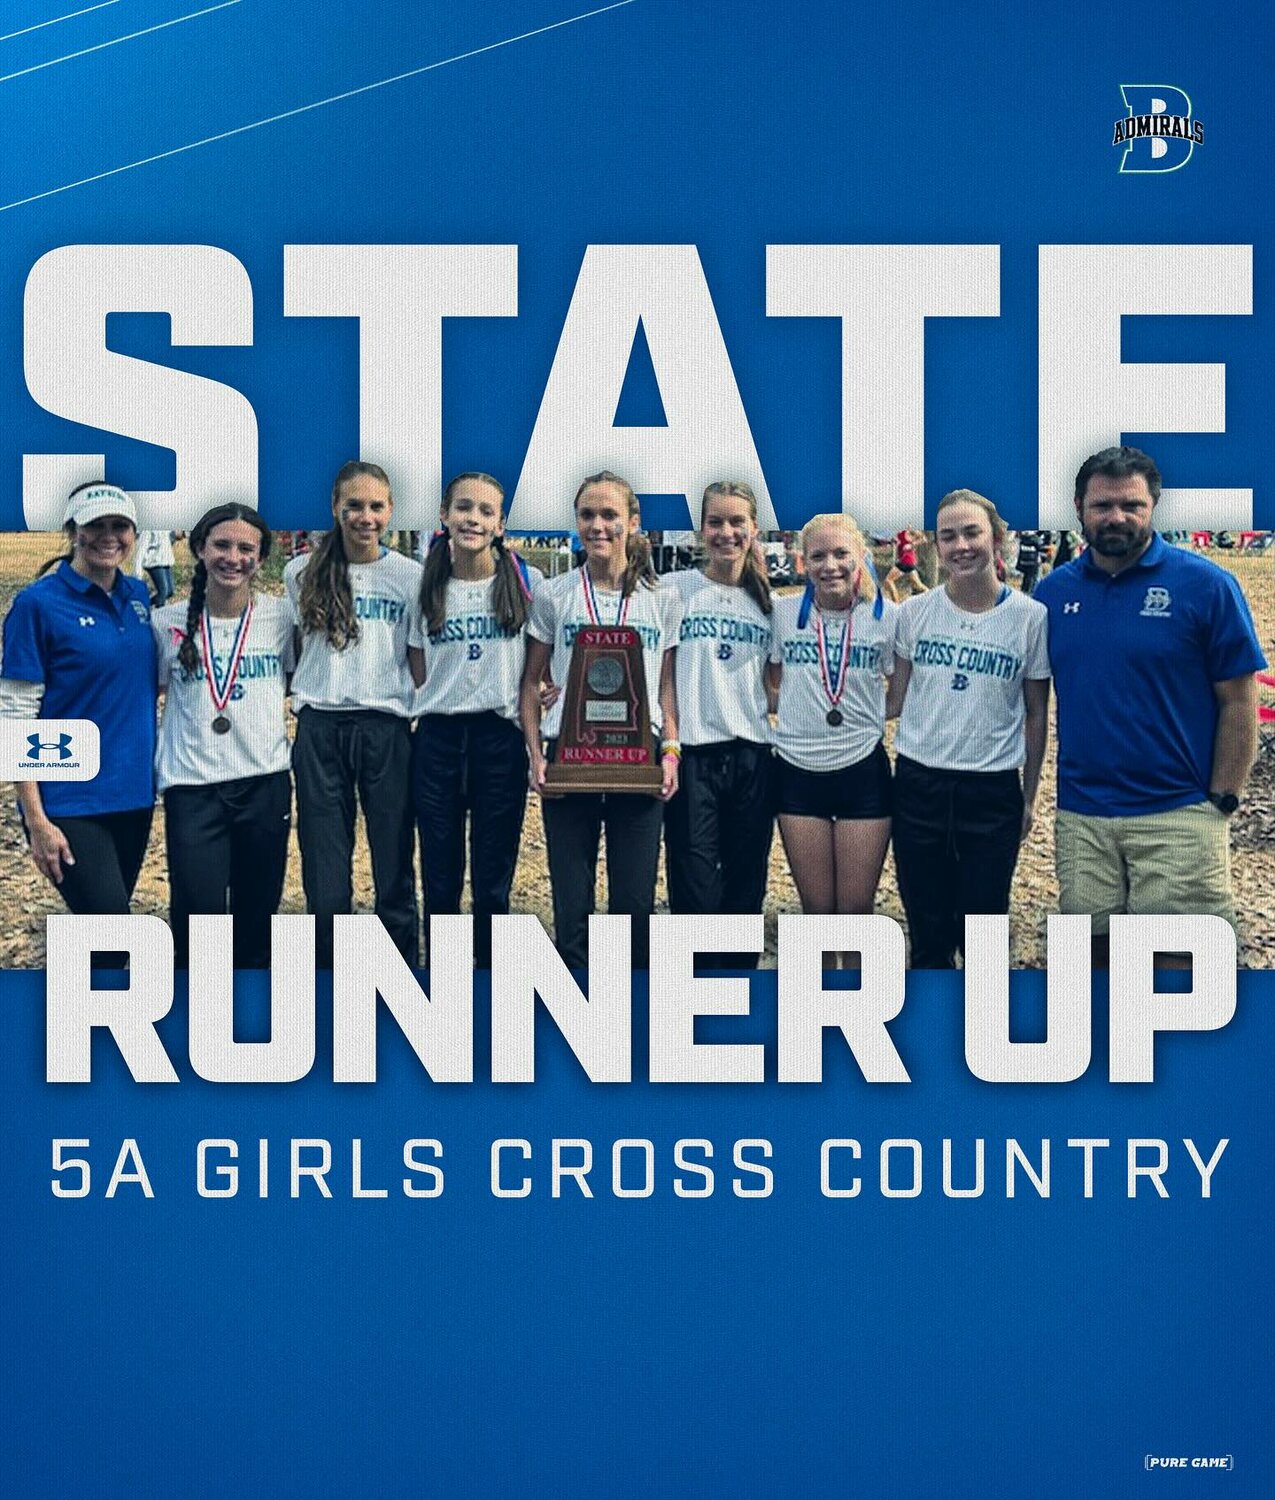 The Bayside Academy girls’ cross country team earned a Red Map trophy as Class 5A runners-up during Saturday’s AHSAA finals in Moulton. Junior Catherine Doyle helped lead the Admirals with a second-place finish where she was joined by four more teammates in the top 20.